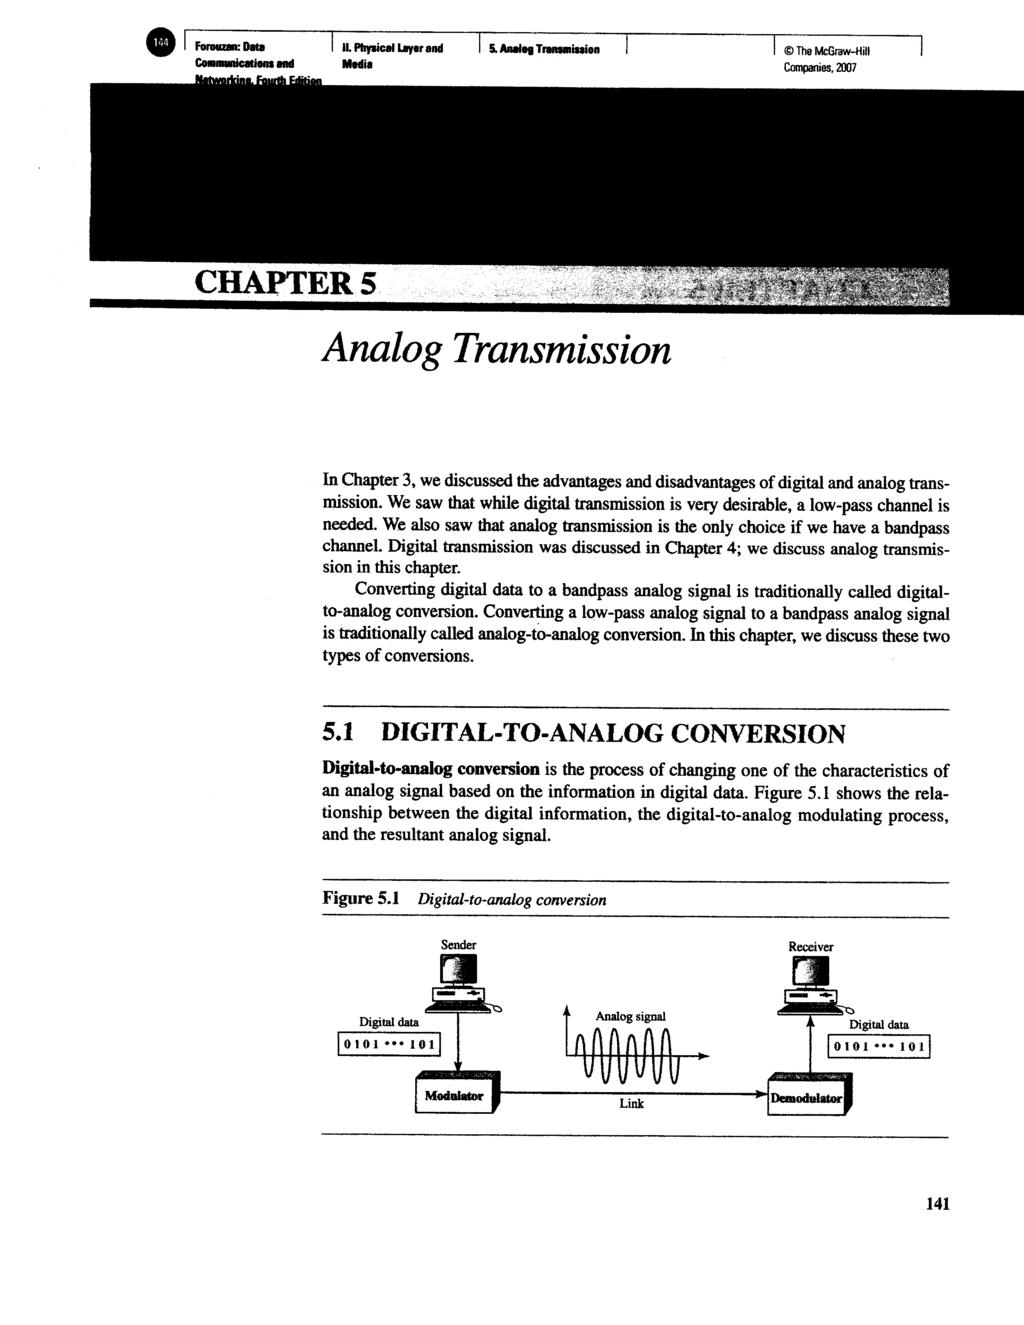 Analog Transmission In Chapter 3, we discussed the advantages and disadvantages of digital and analog transmission.